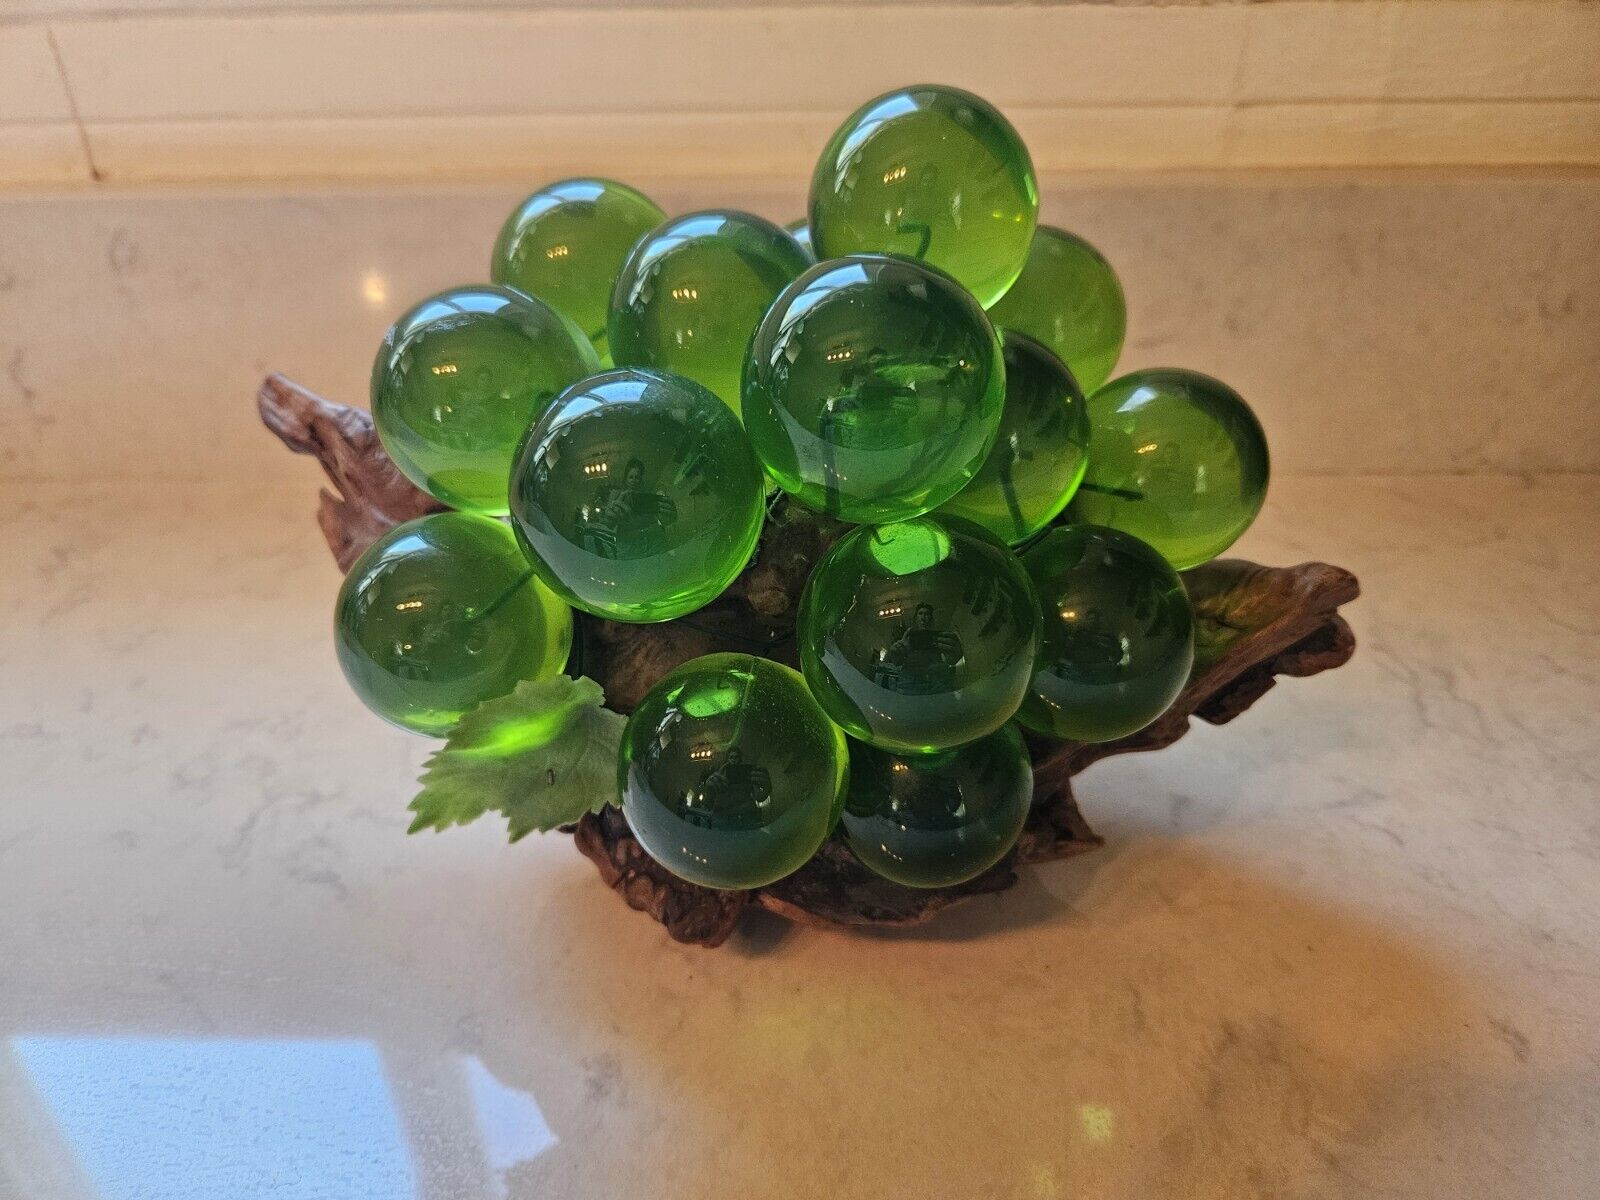 Vintage Lucite Plastic Large Green Grapes Cluster 14 Grapes On Driftwood